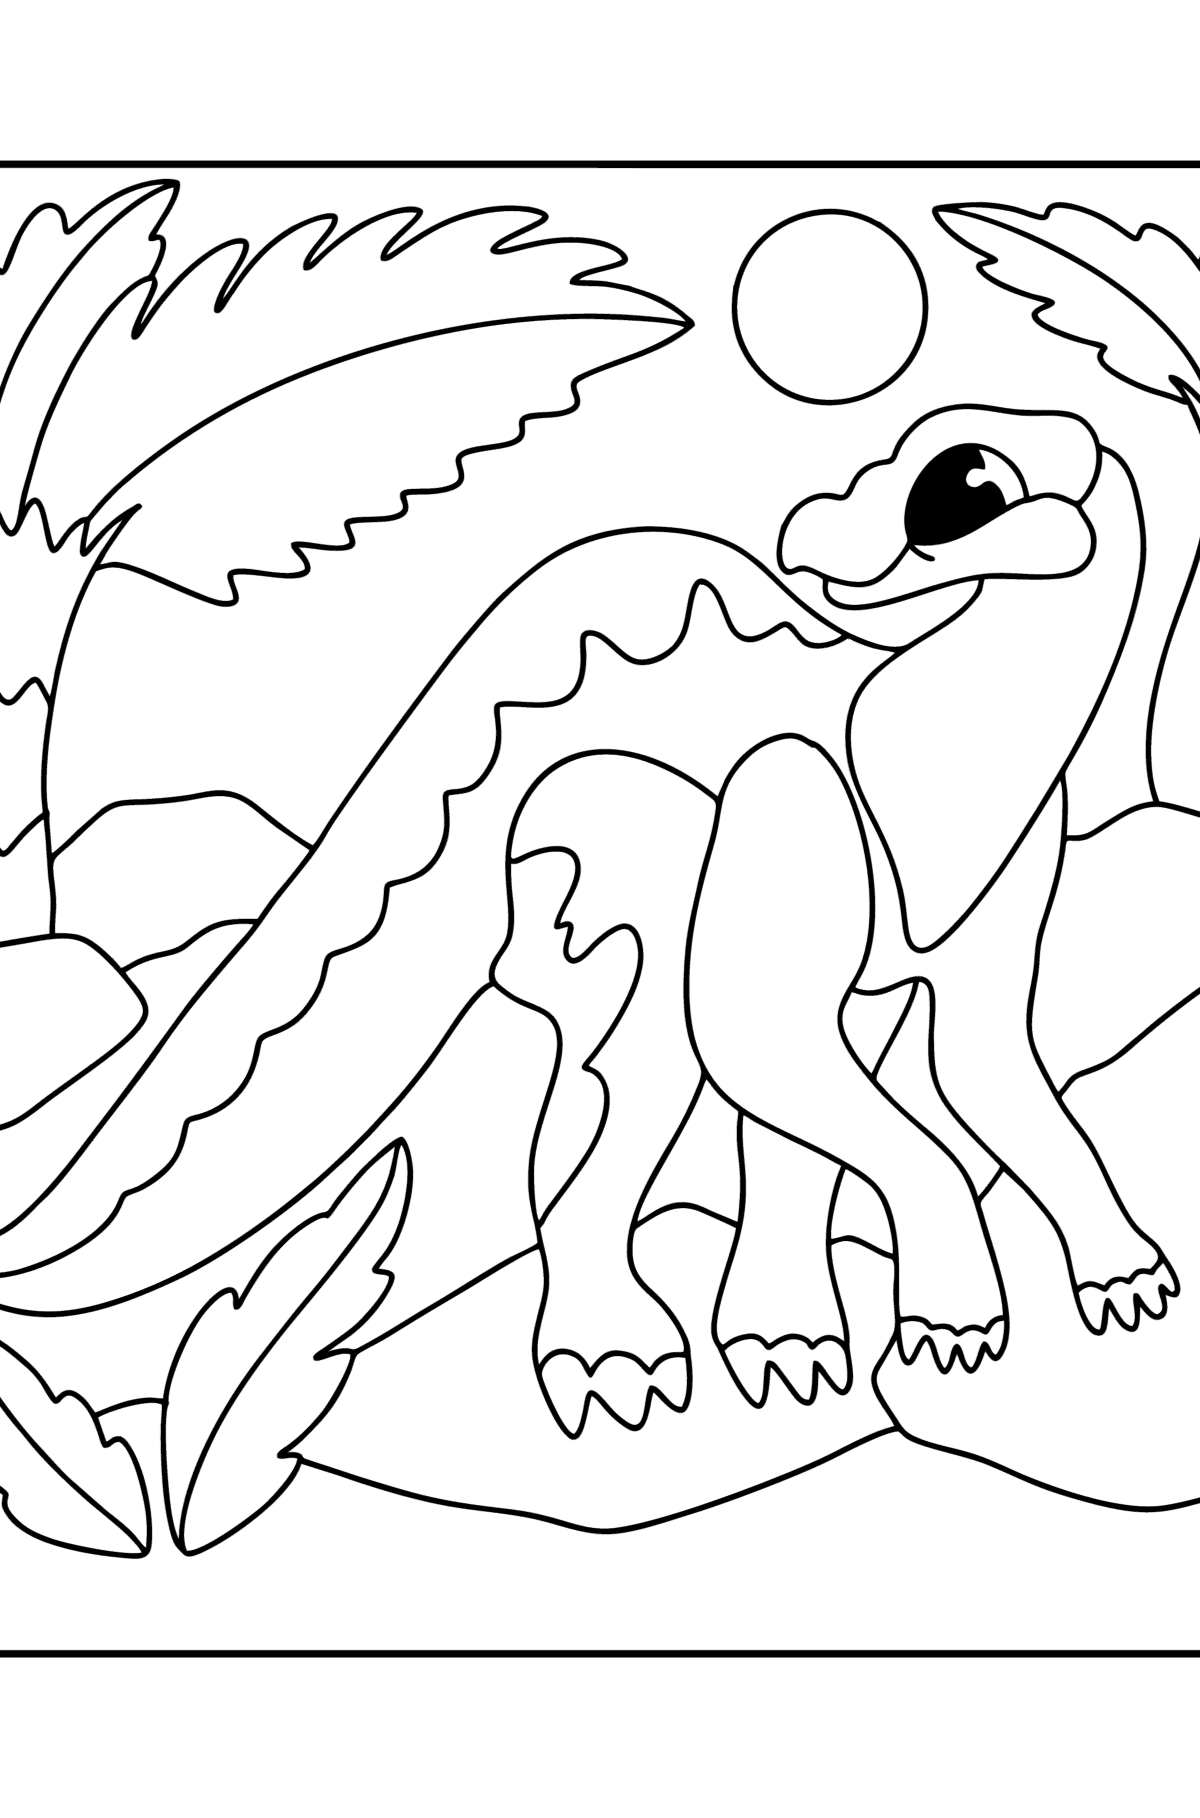 Iguanodon coloring page - Coloring Pages for Kids